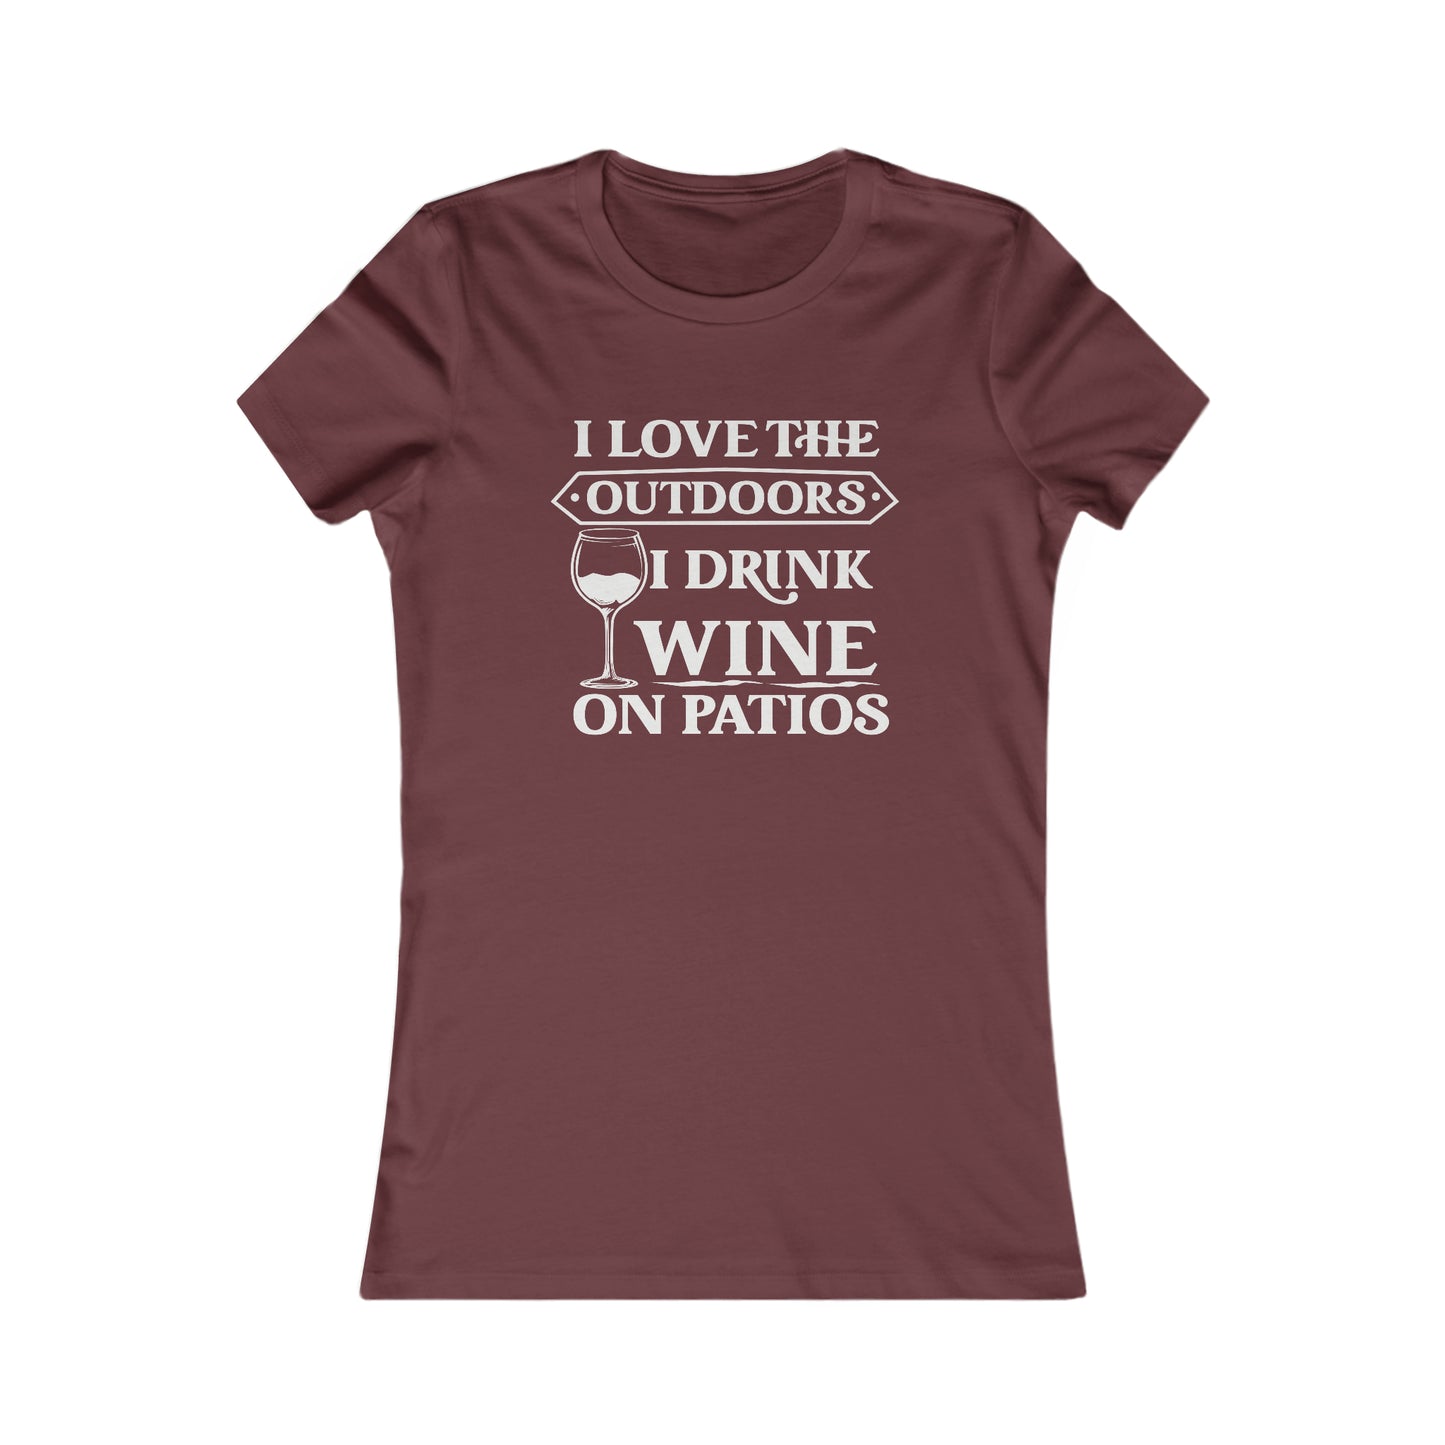 I Love The Outdoors - I Drink Wine On Patios Women's Favorite Tee